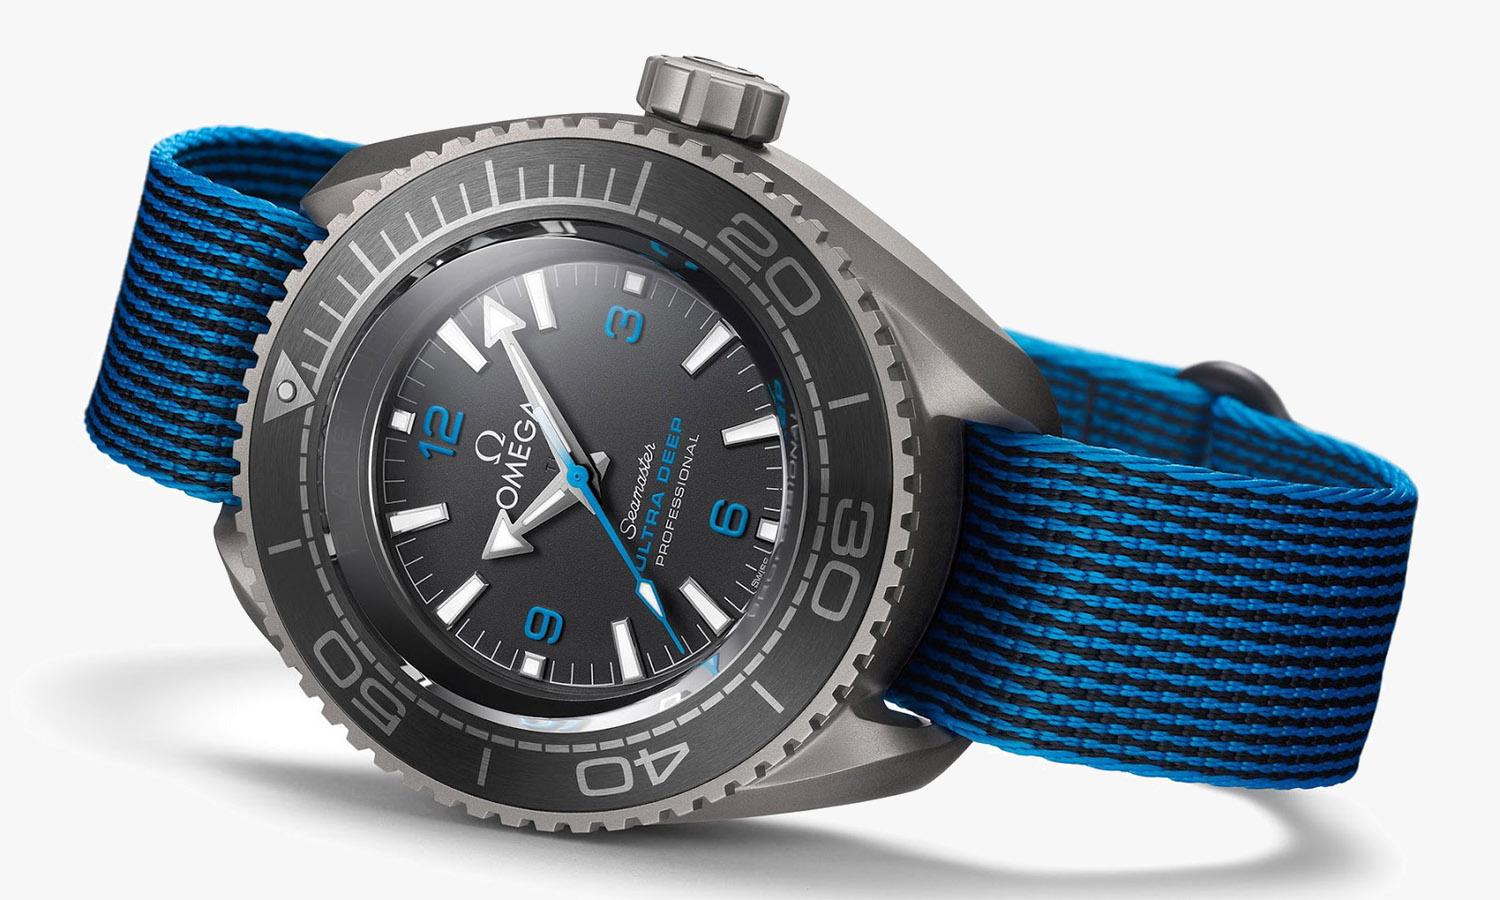 Omega Seamaster Ultra Deep Sea Watch – Fit For Exploration